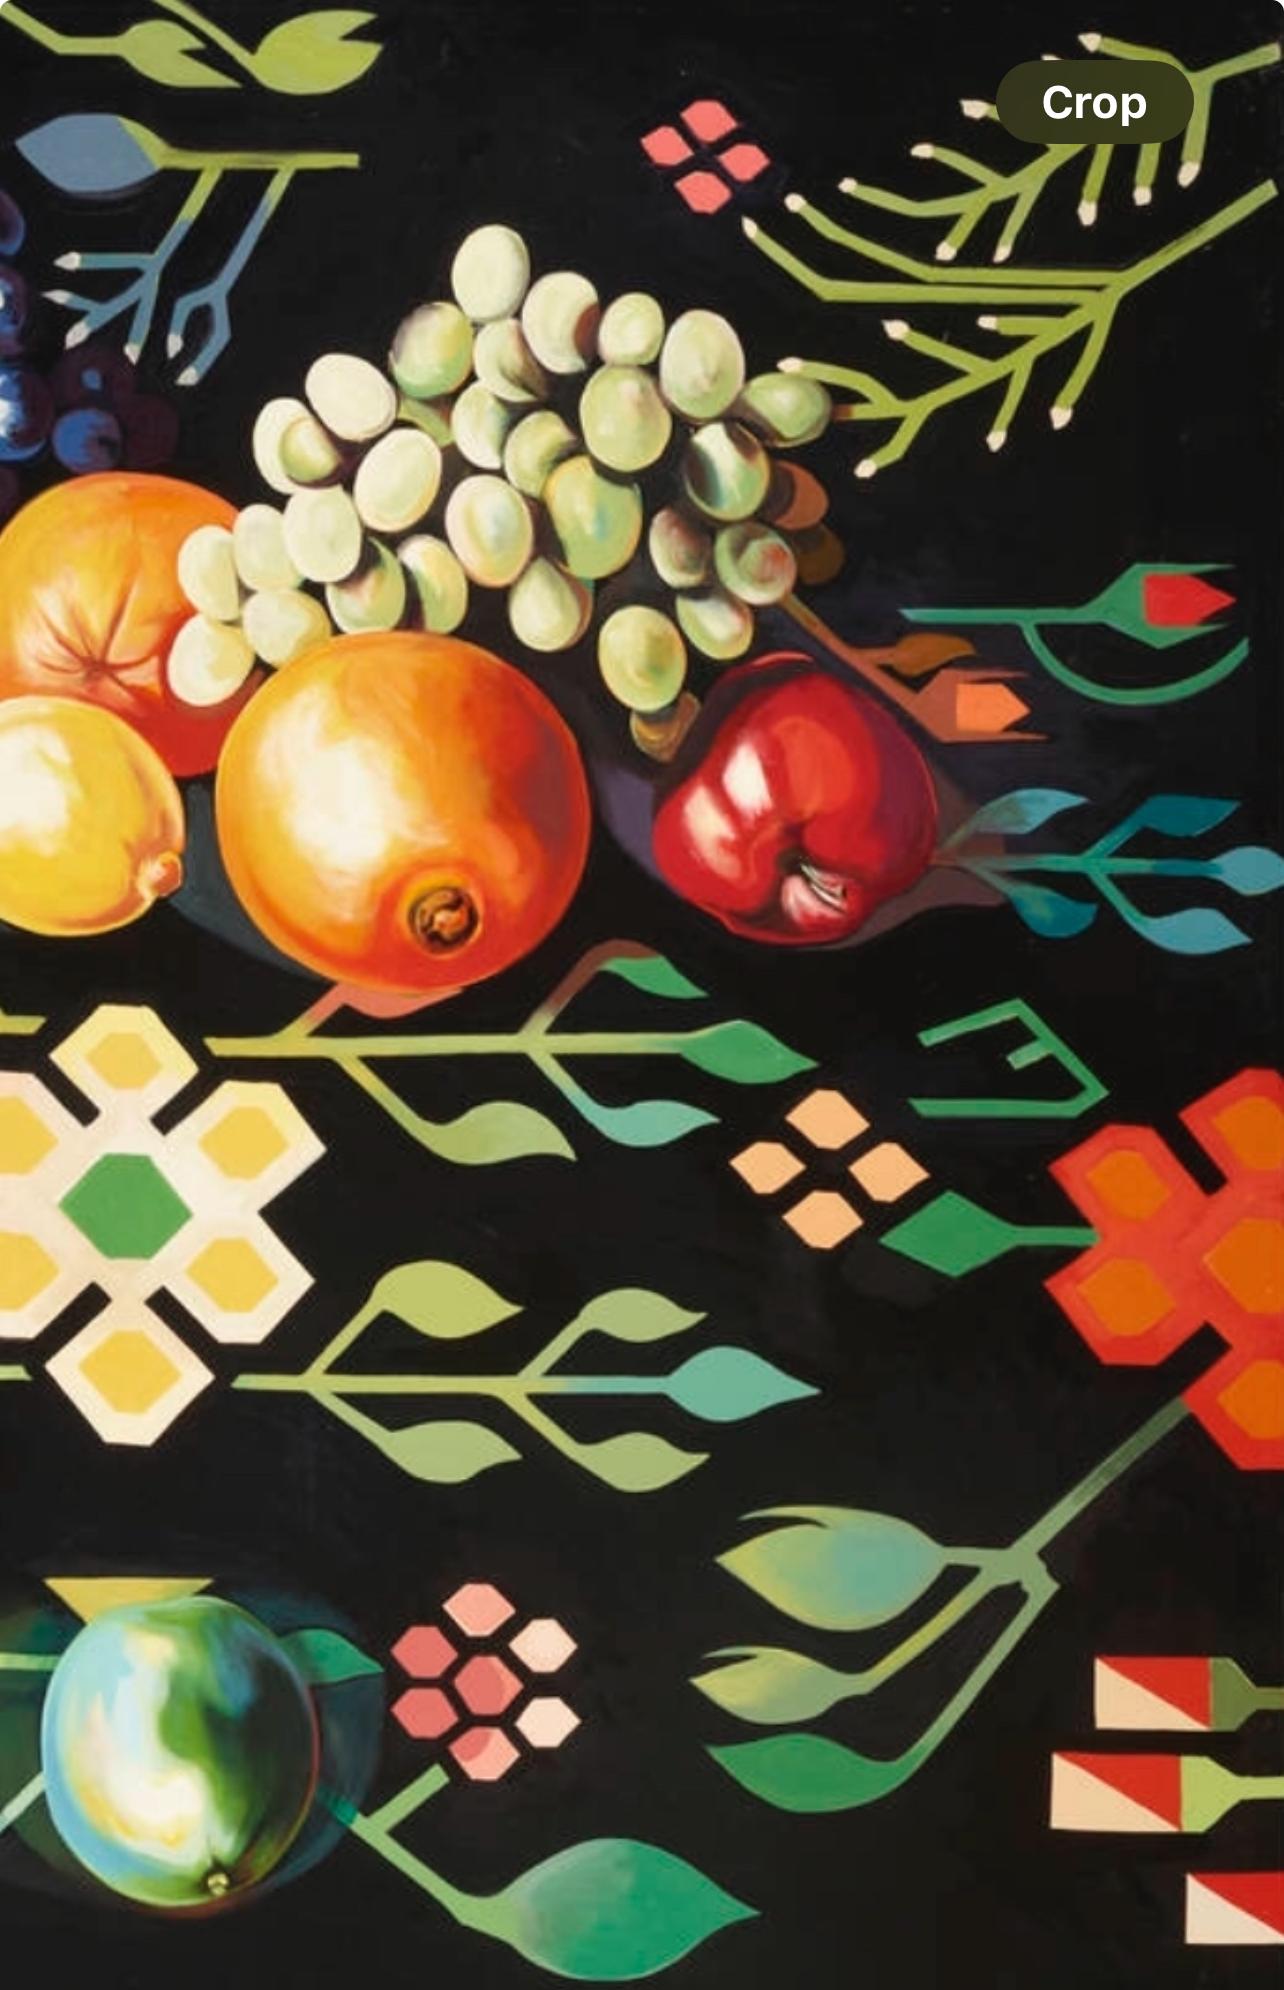 Fruit on Romanian Rug IV (100 x 80 inches), Lowell Nesbitt - Painting For Sale 2